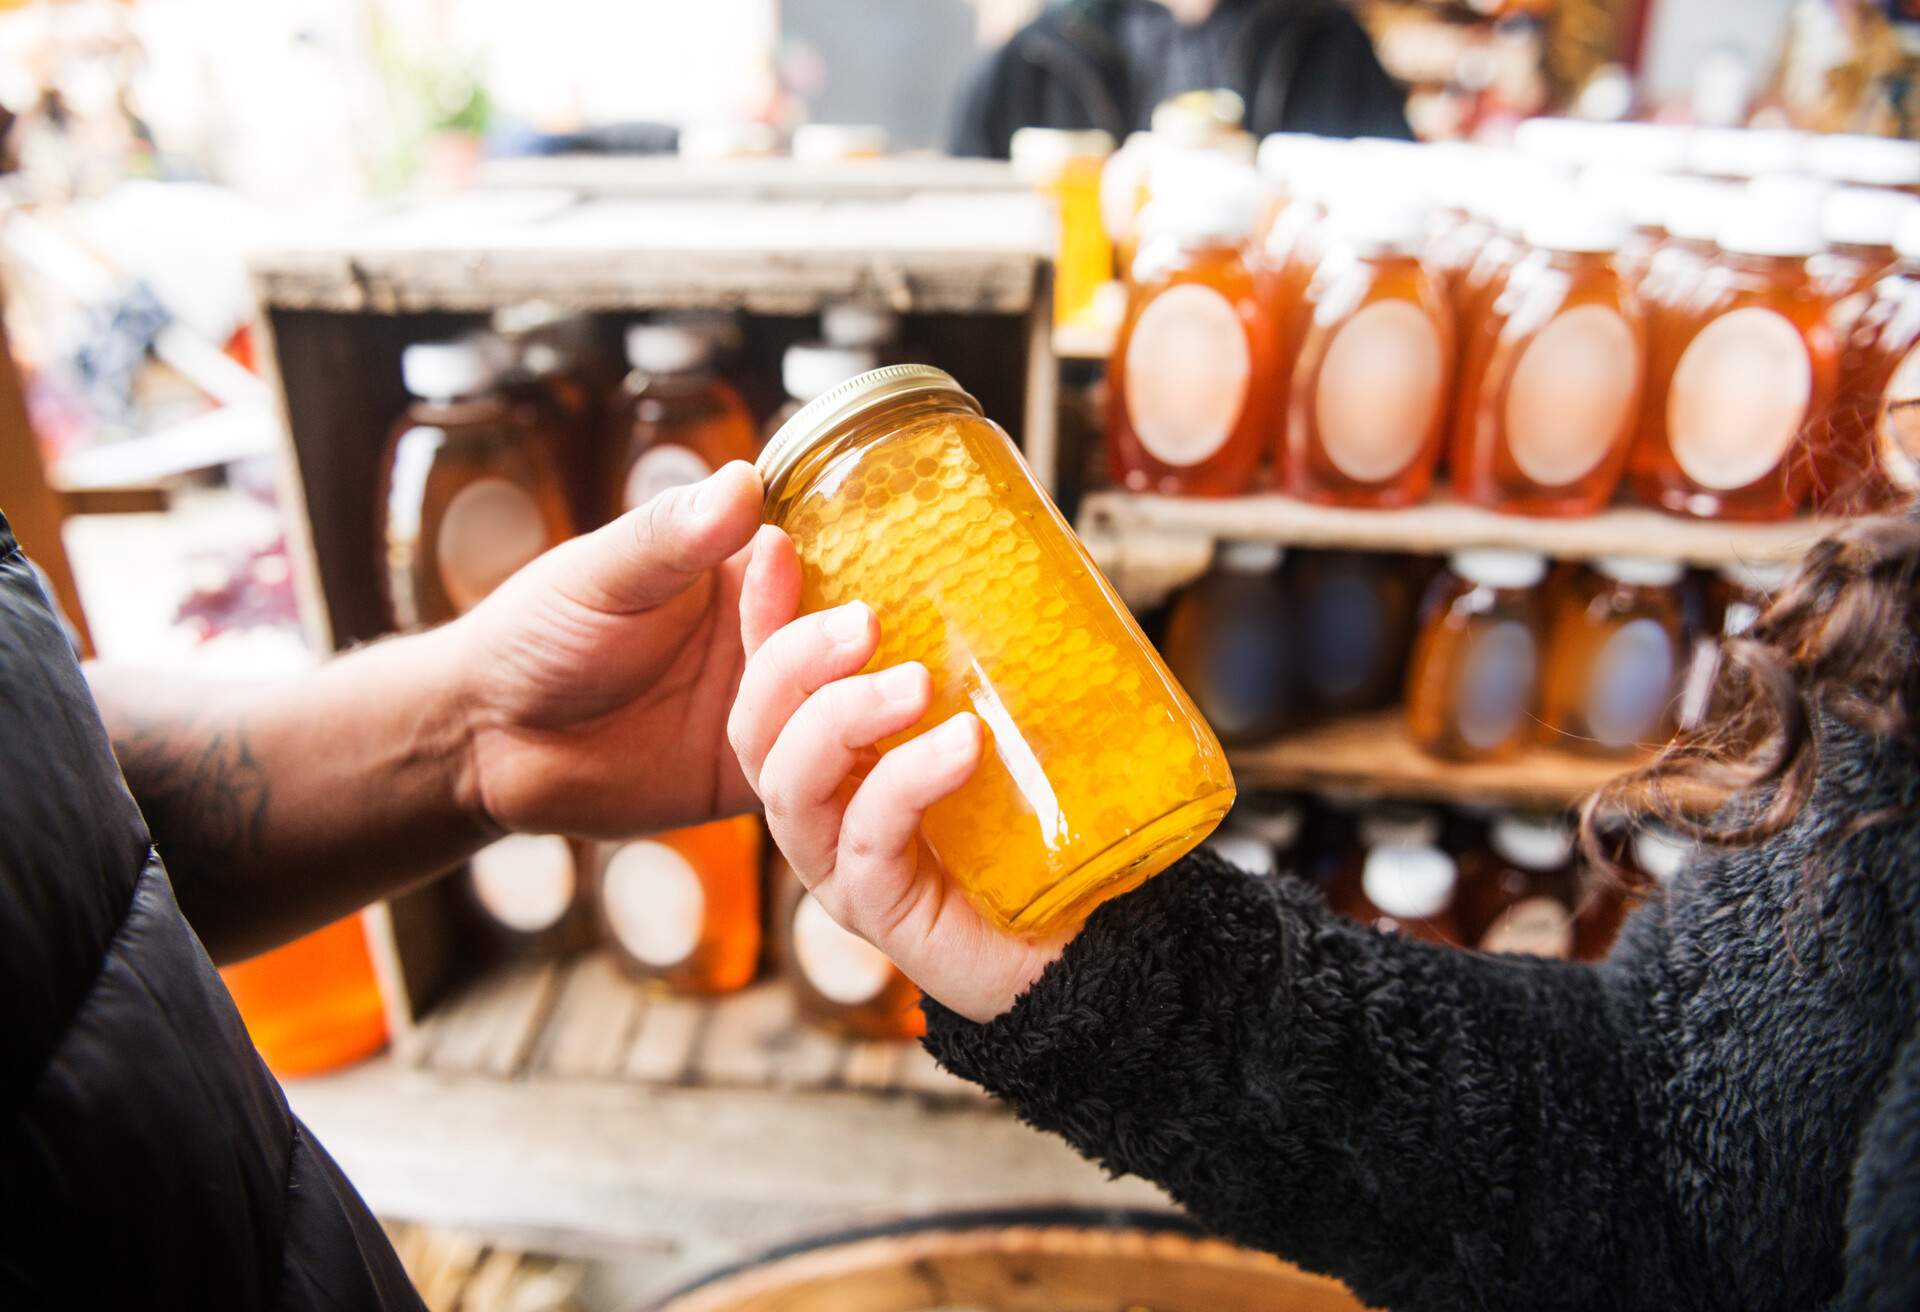 A Hispanic couple in their 20s shops for honey at a farmer’s market in upstate New York.